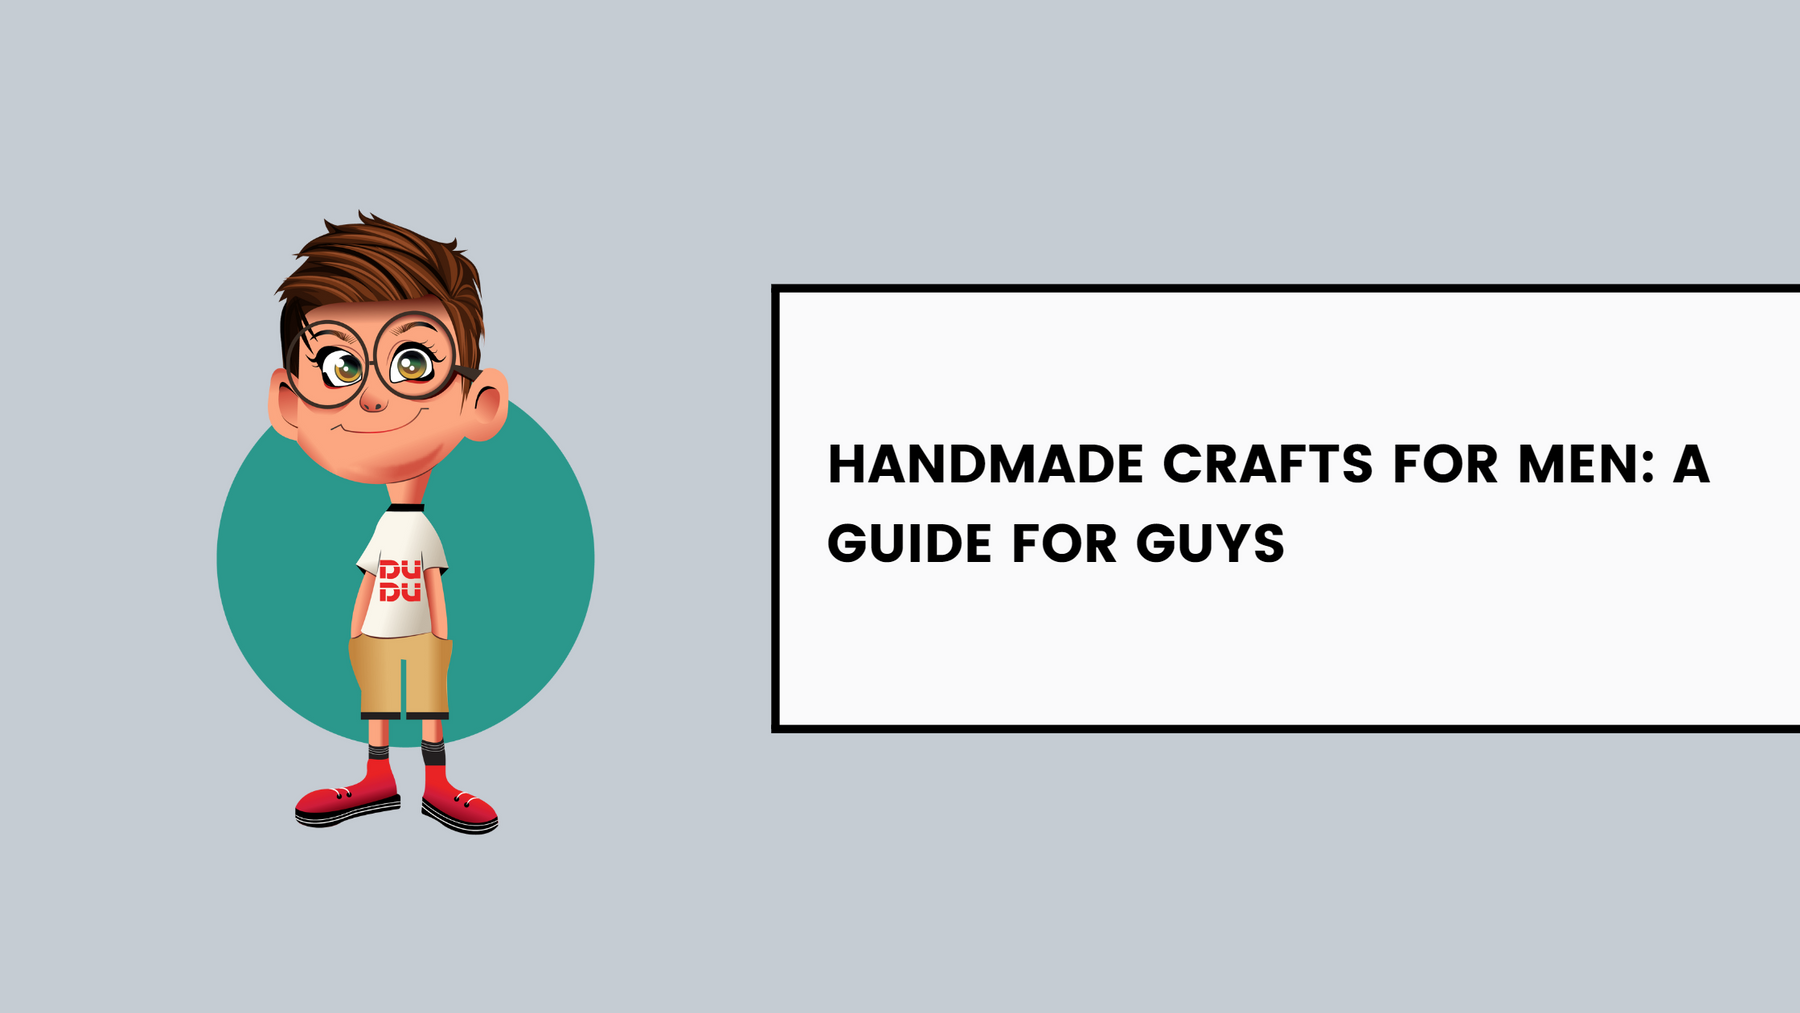 Handmade Crafts For Men: A Guide For Guys